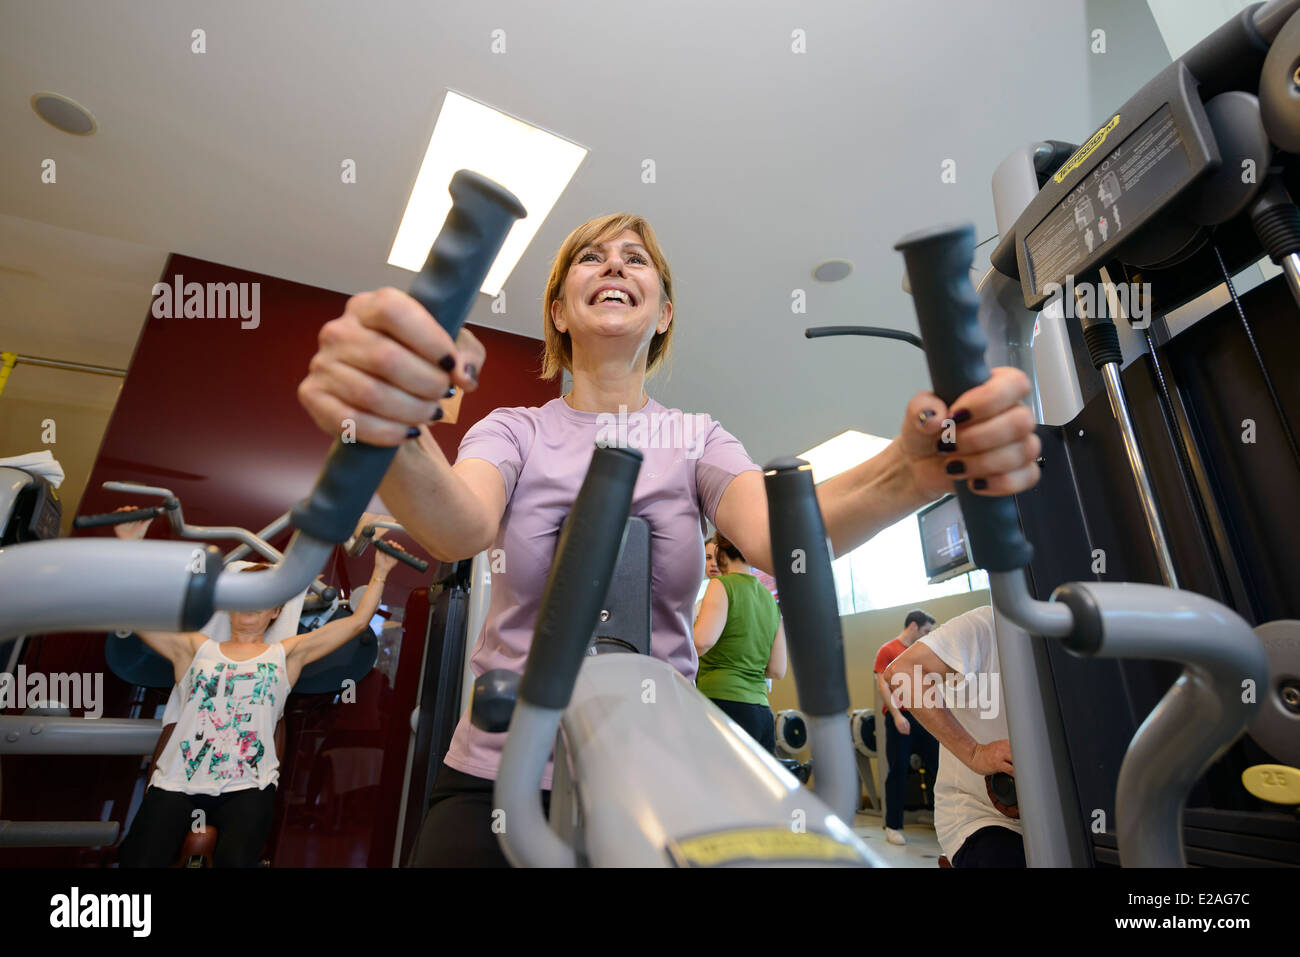 Middle aged woman working out on a rowing machine at the gym Stock Photo